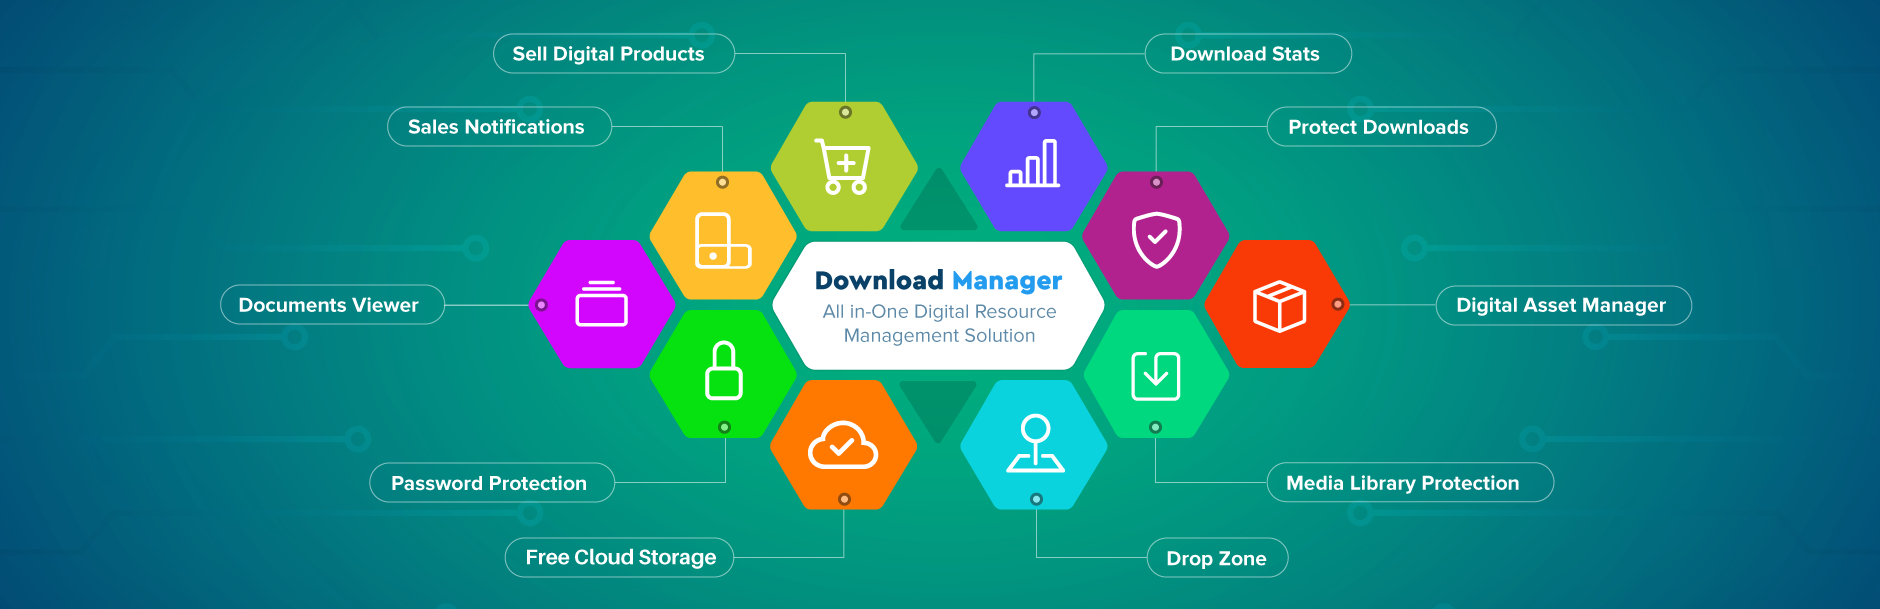 Product image for Download Manager.